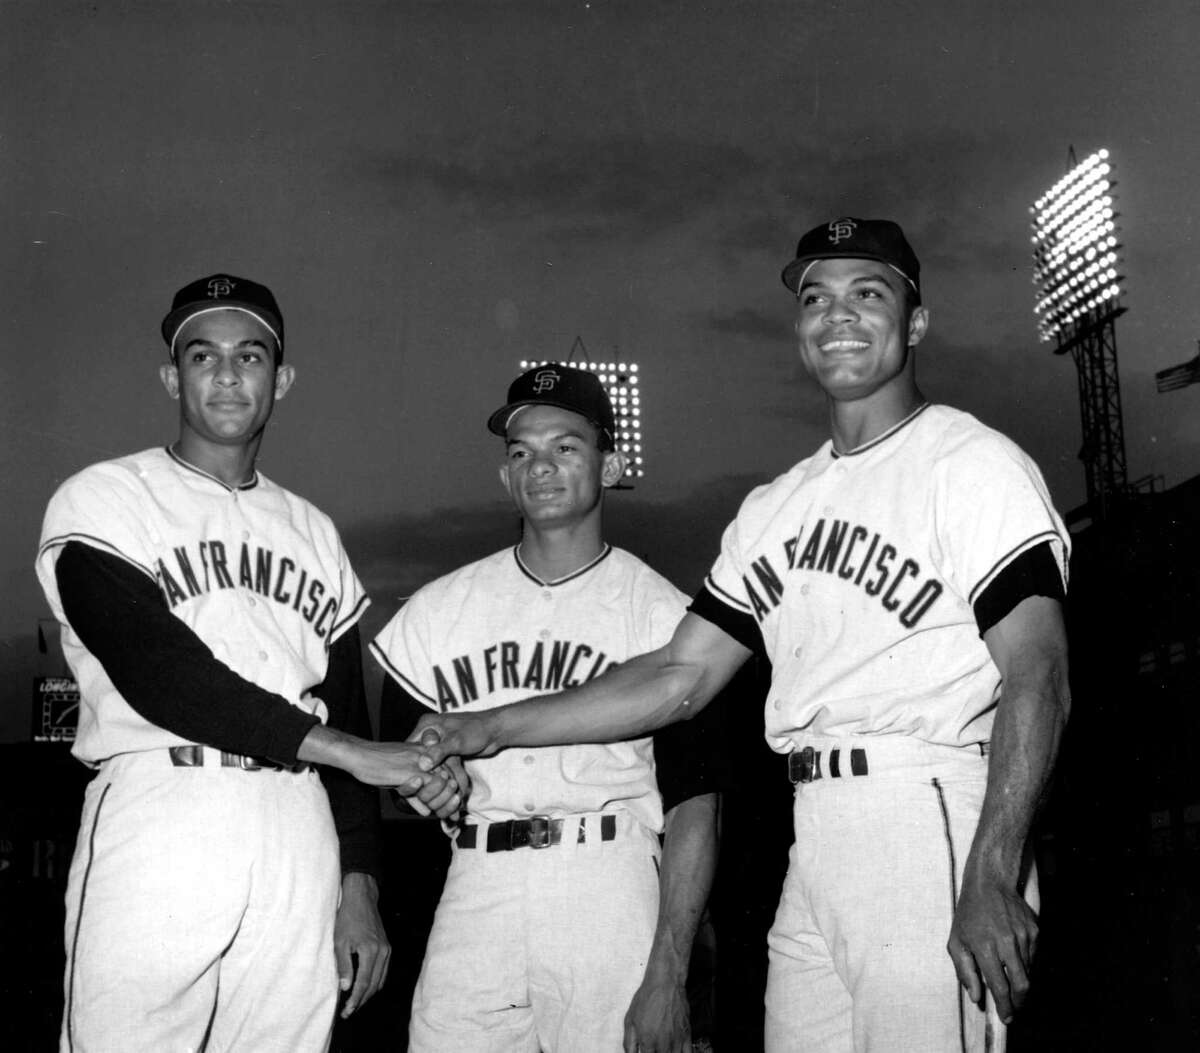 San Francisco outfielders, from left, Jesus Alou, Matty Alou and Felipe Alou, of the Dominican Republic, pose in a three-way hand shake before start of a baseball game with the New York Mets at New York’s Polo Grounds in 1963.